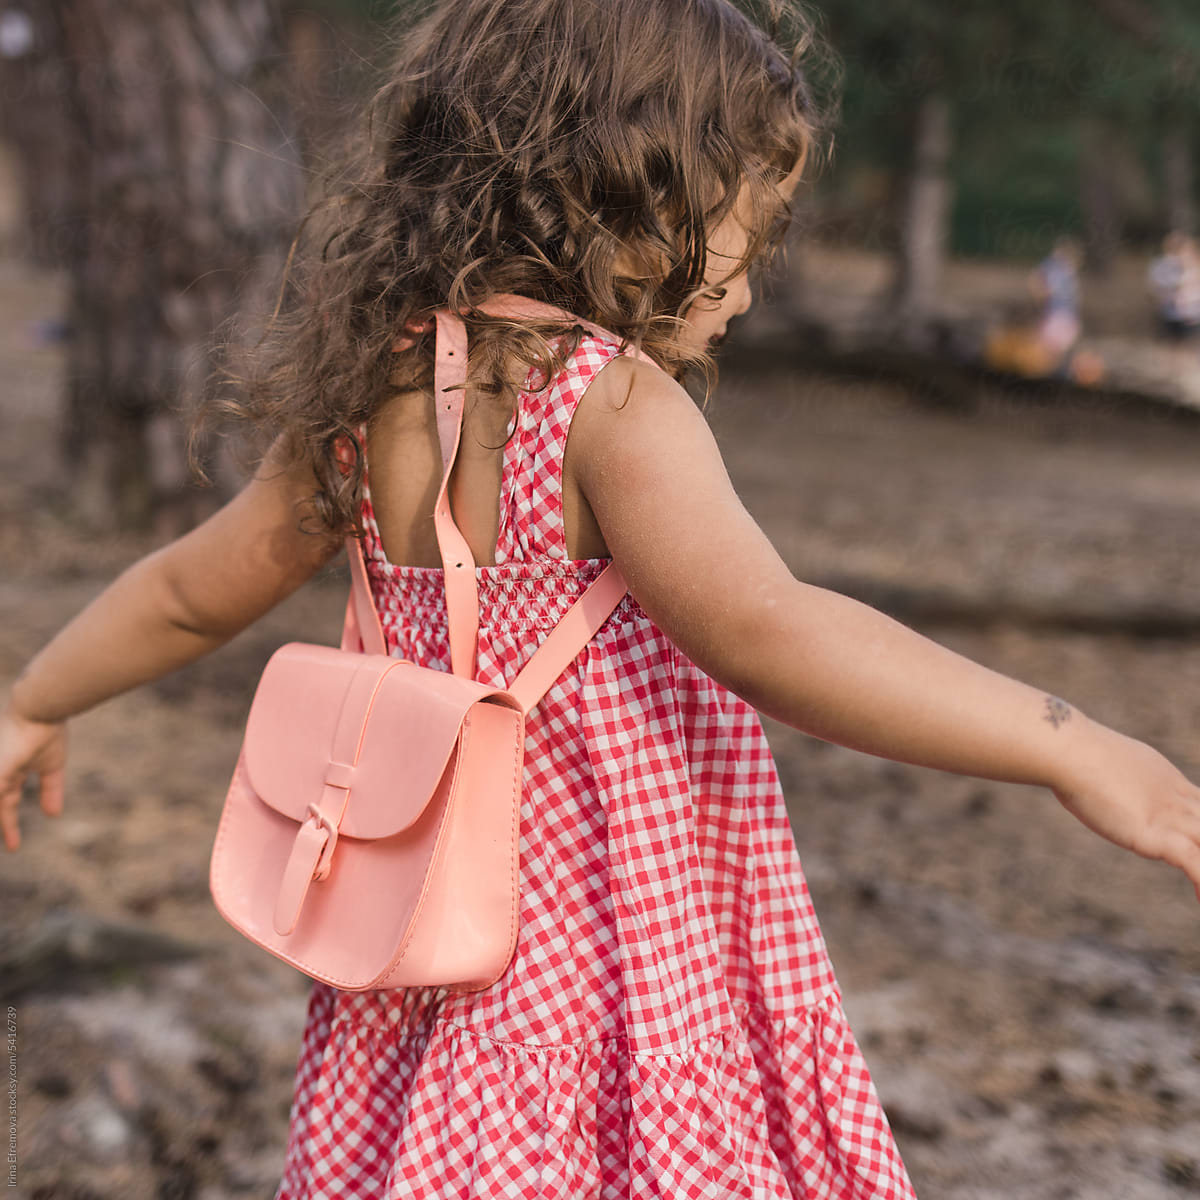 Dancing Little Girl in Red Dress with Pink Backpack seen from back